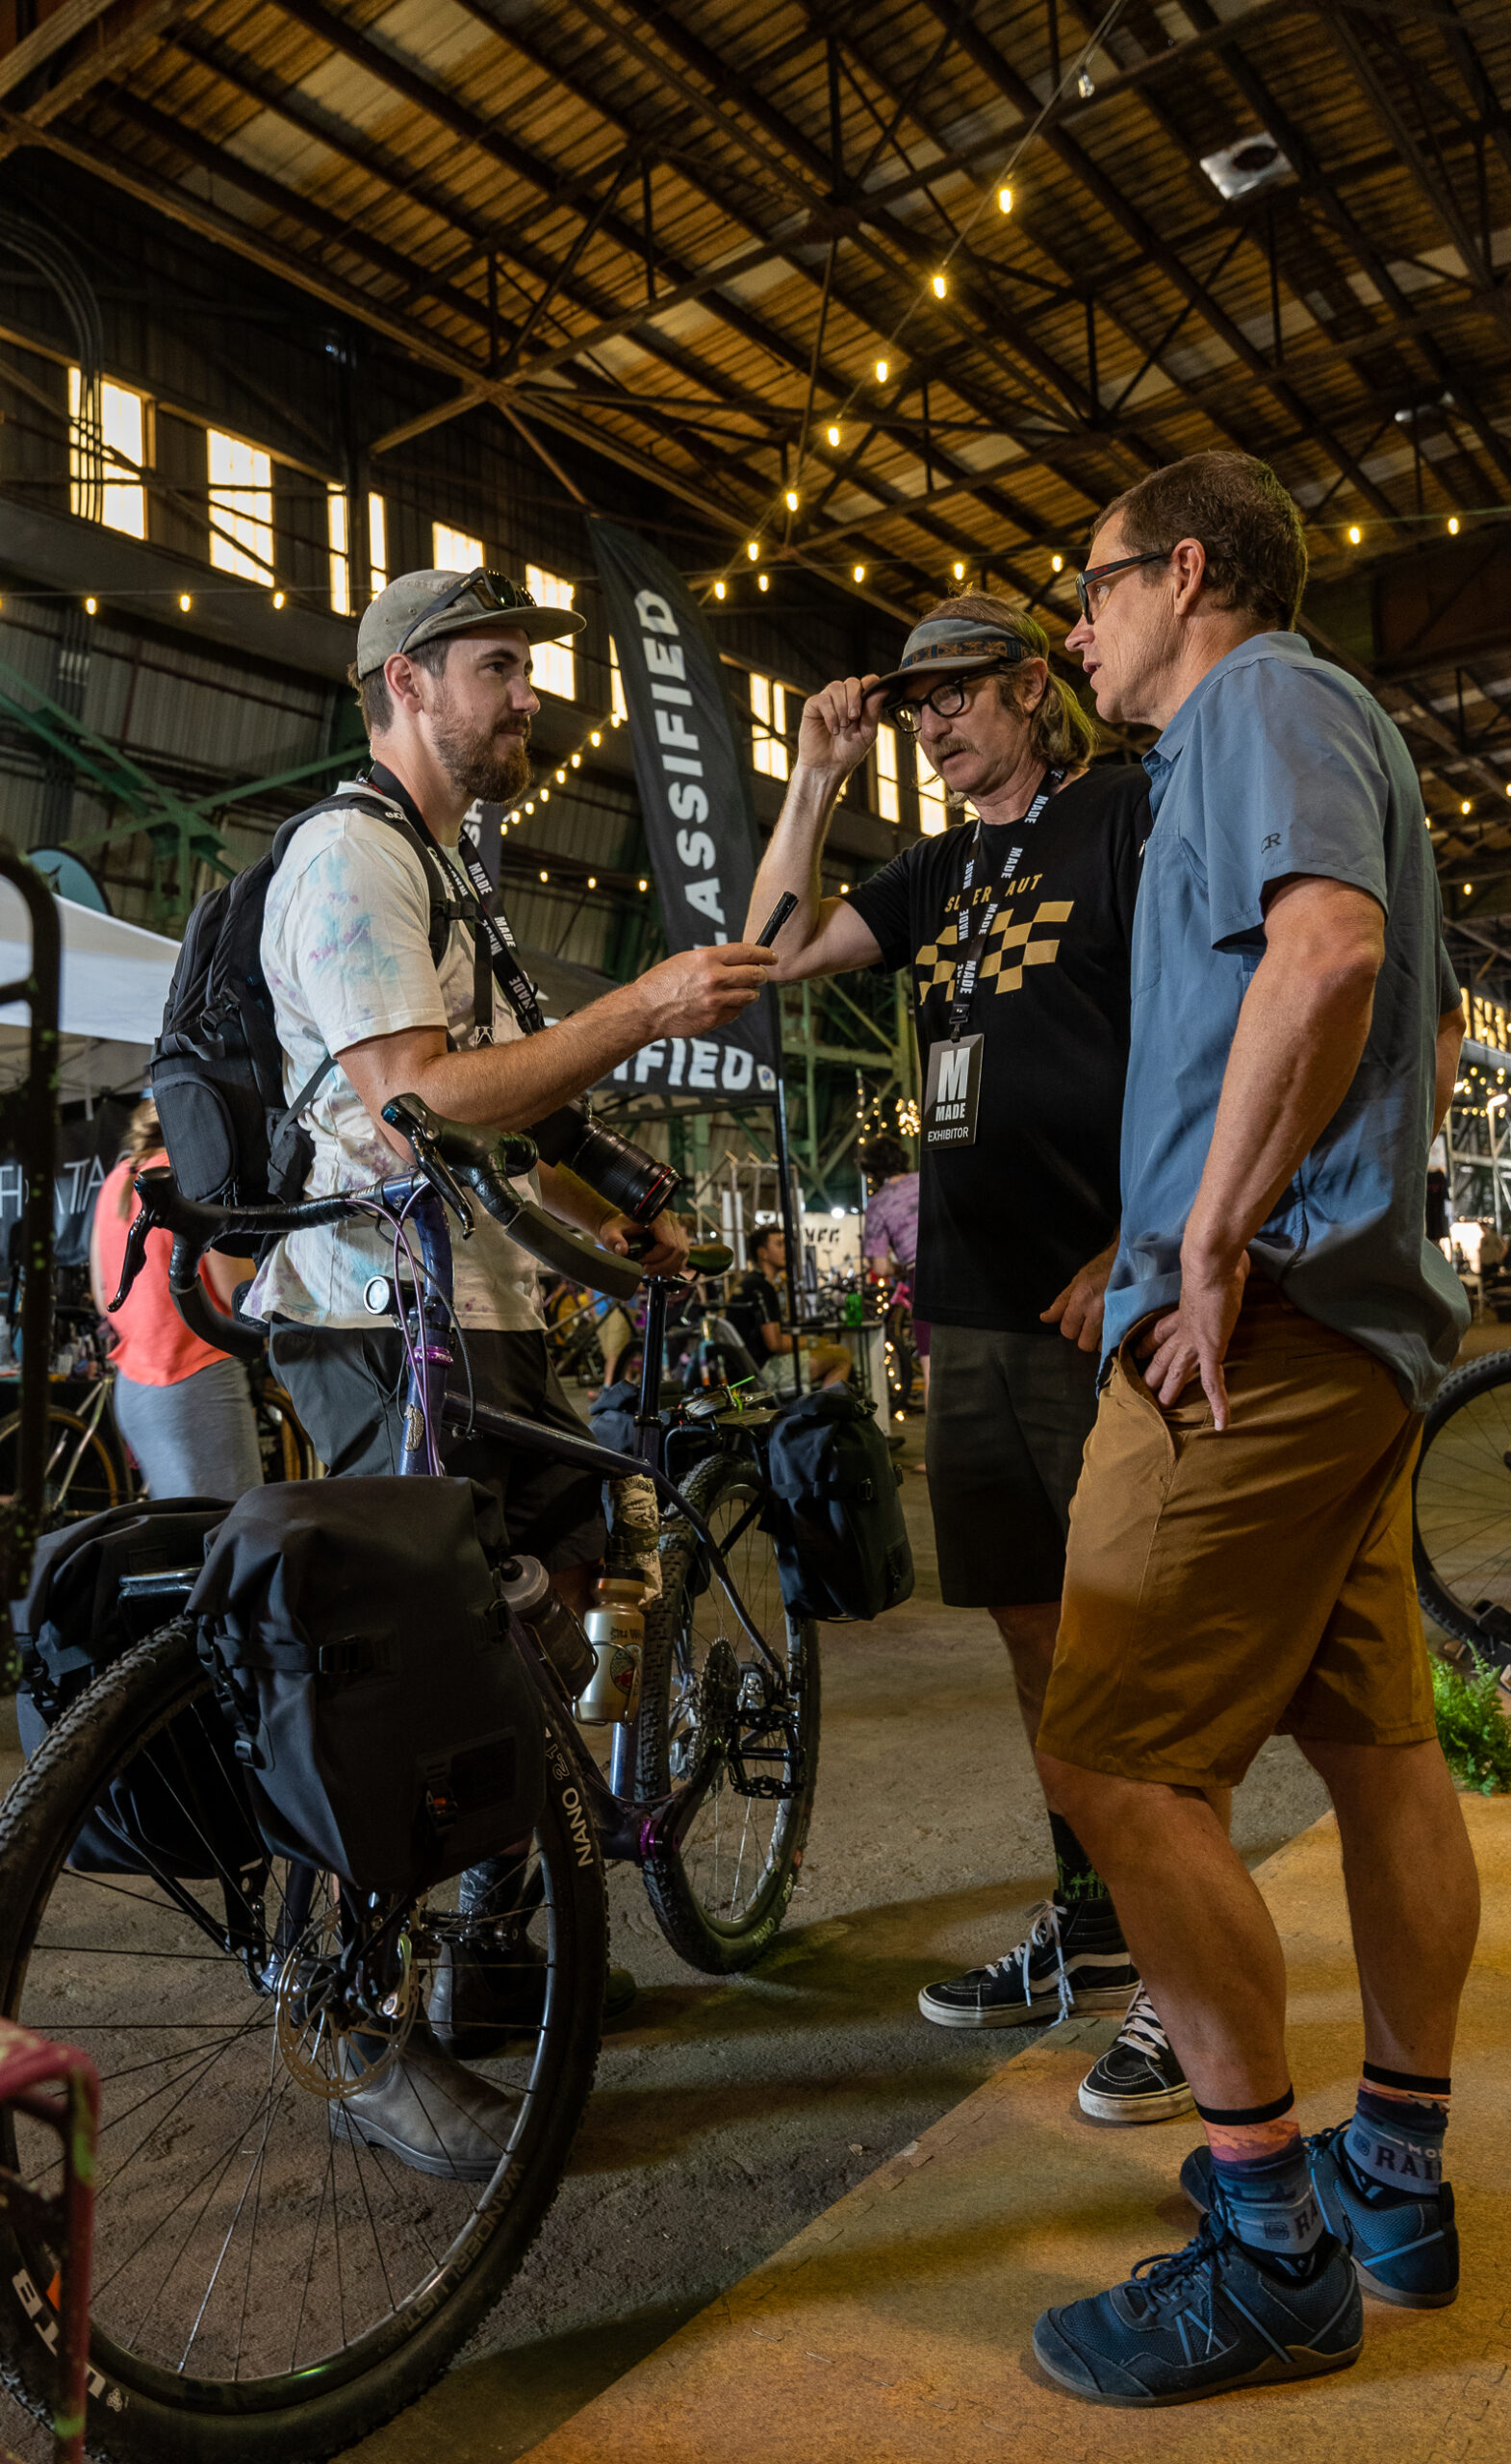 Miles from Bikepacking.com, Vulture Wade, and our COO Chris Kratsch